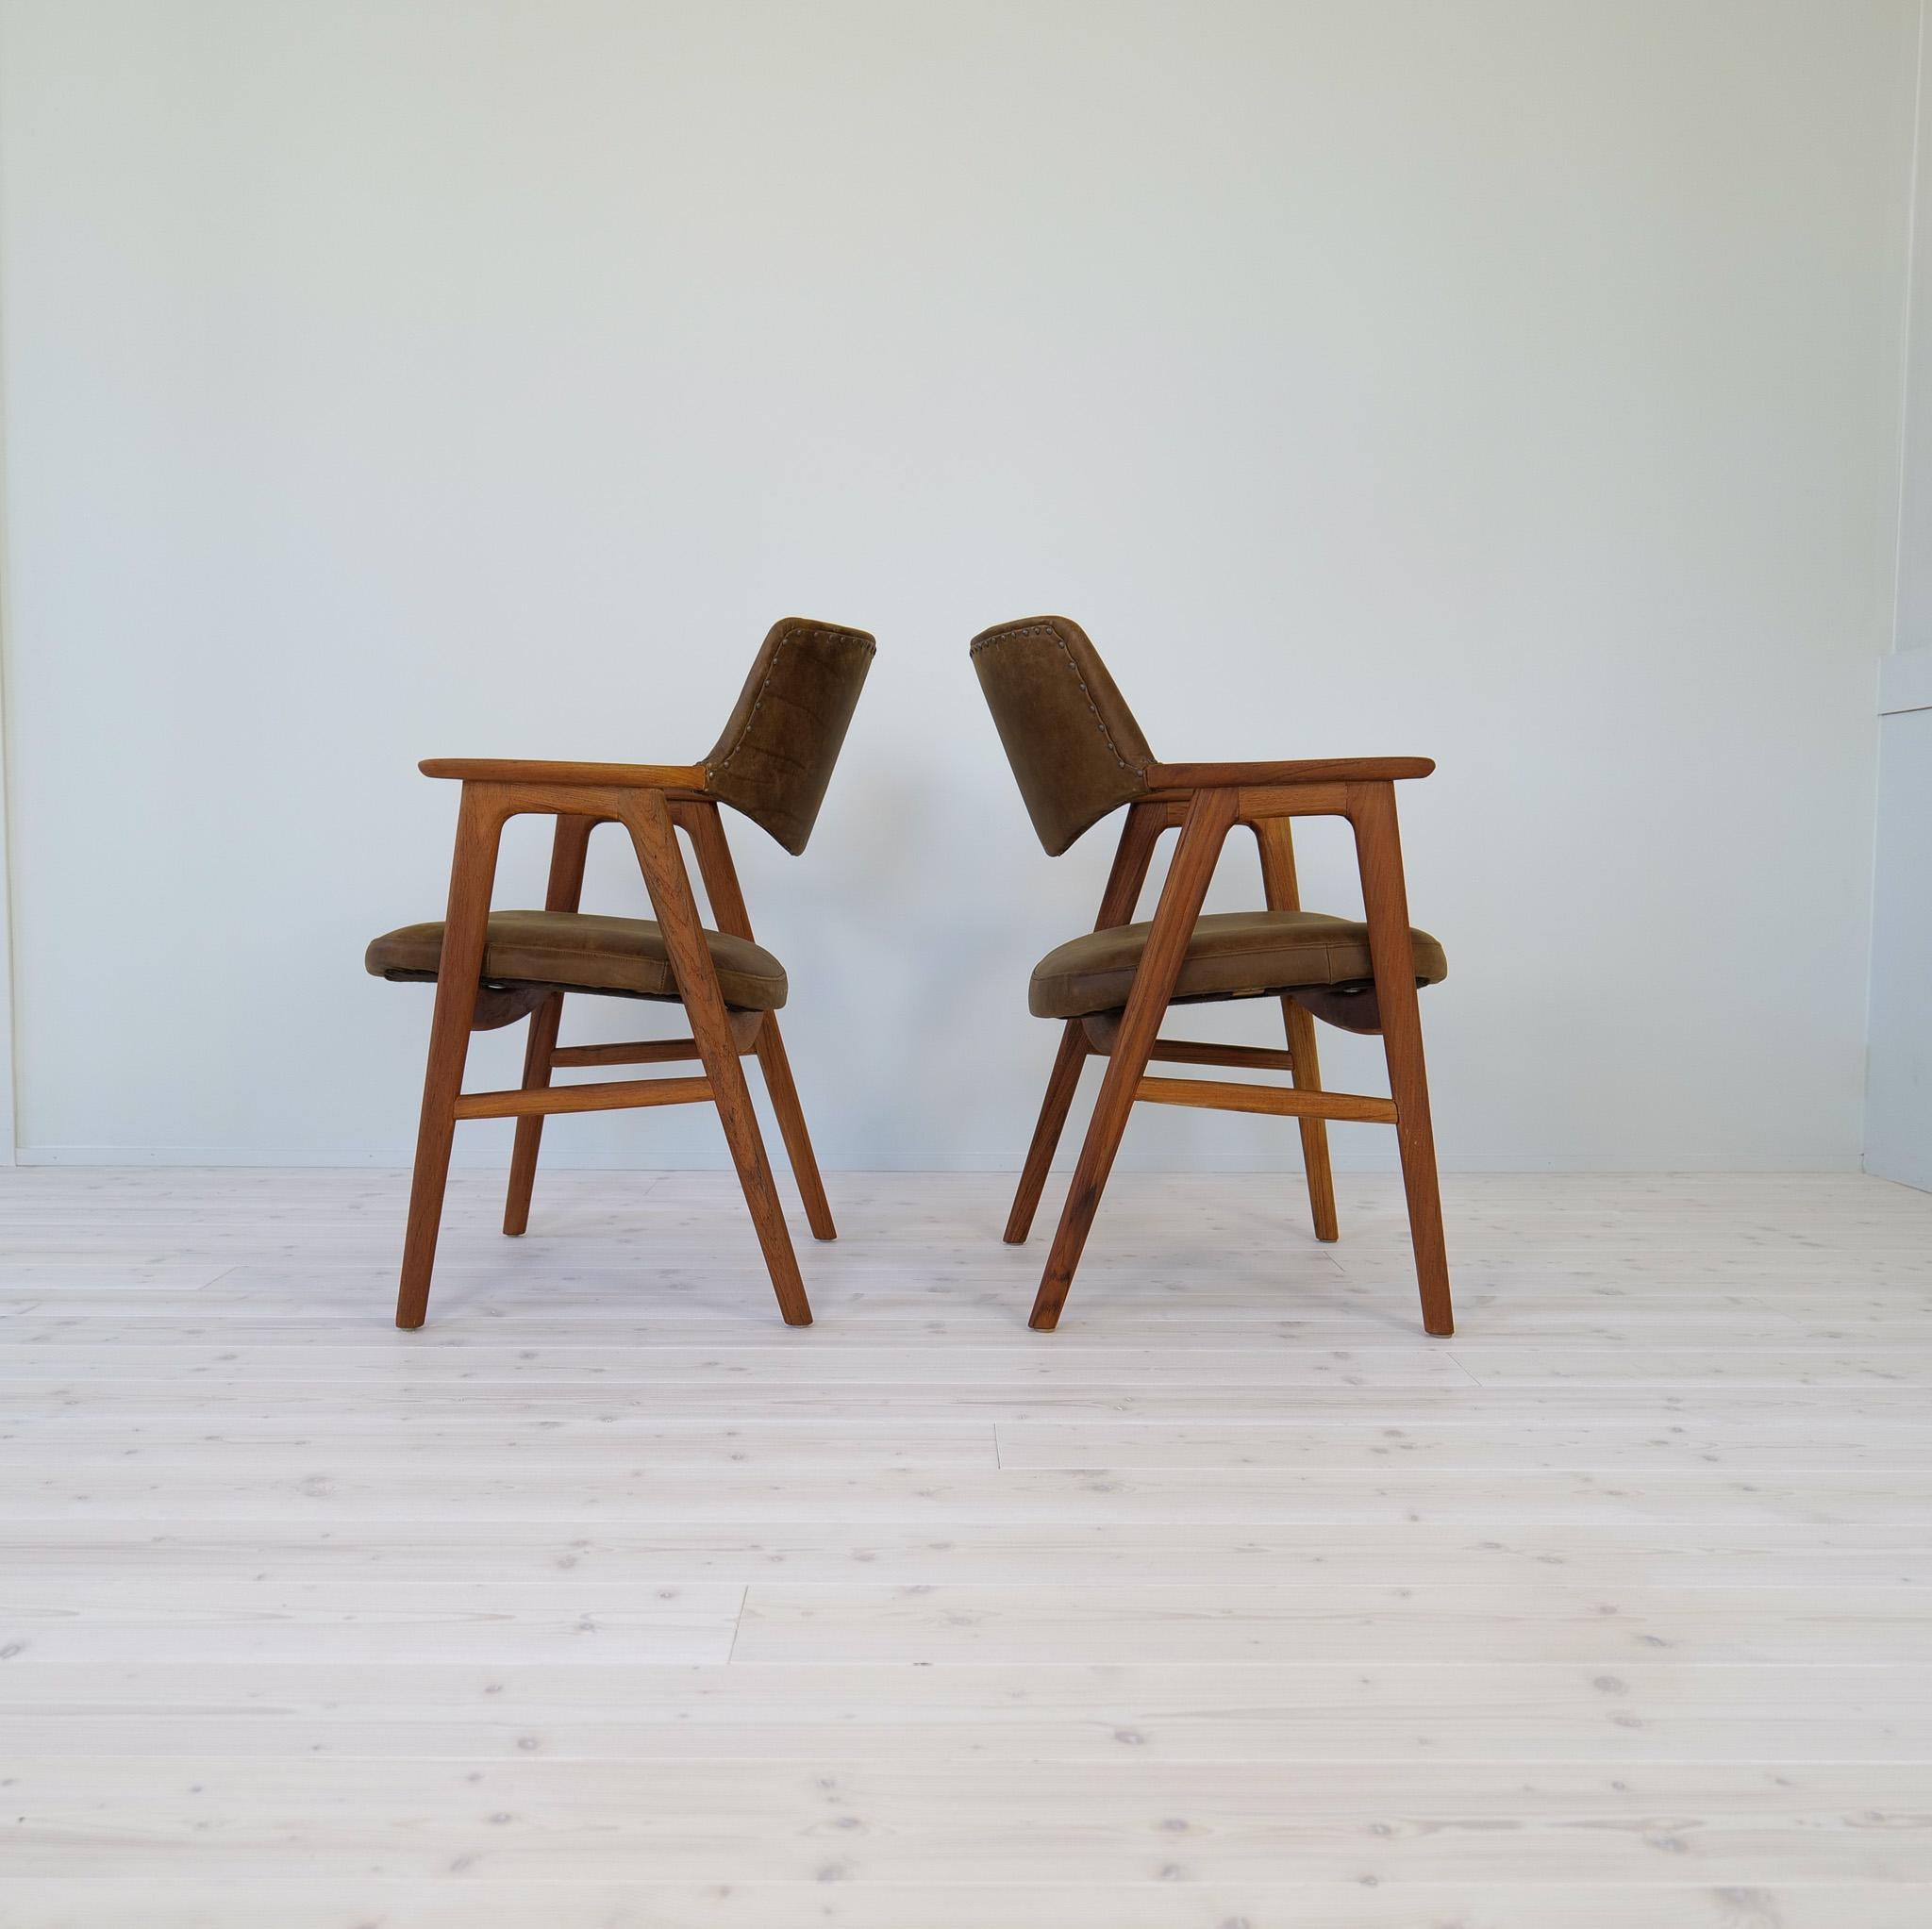 Wonderful set of 2 Erik Kirkegaard Danish desk chairs in teak designed for Høng Stolefabrik in 1956. 
New brown high-quality leather upholstered.

Very good vintage design with all new upholstery in leather. 

Dimensions: Height: 32.6 in. (83